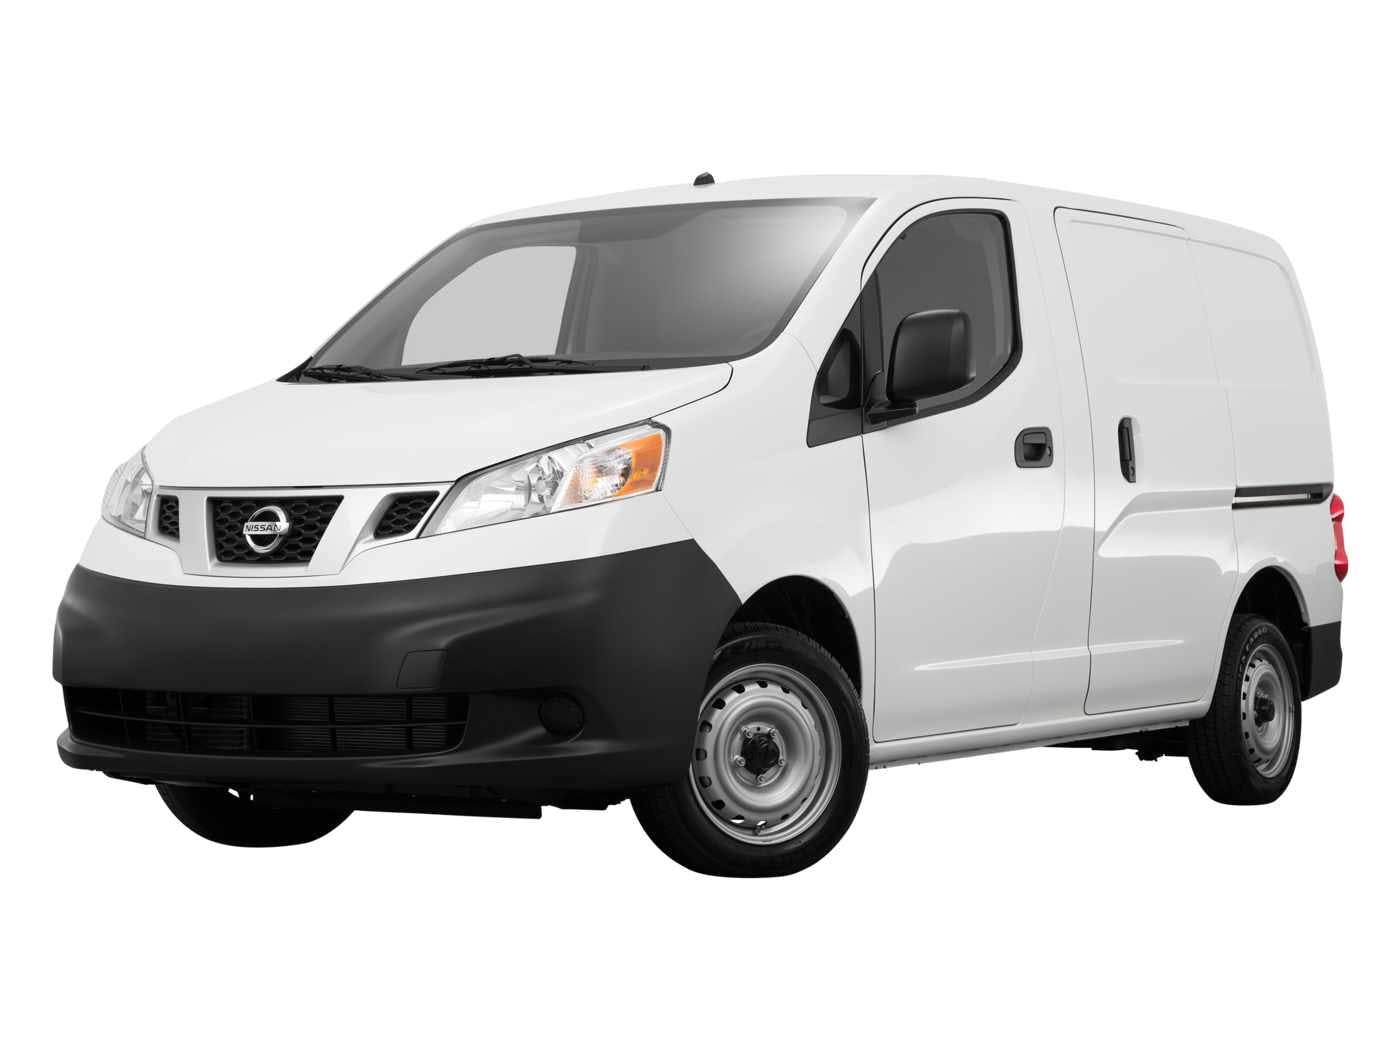 2017 Nissan NV200 Compact Cargo Review